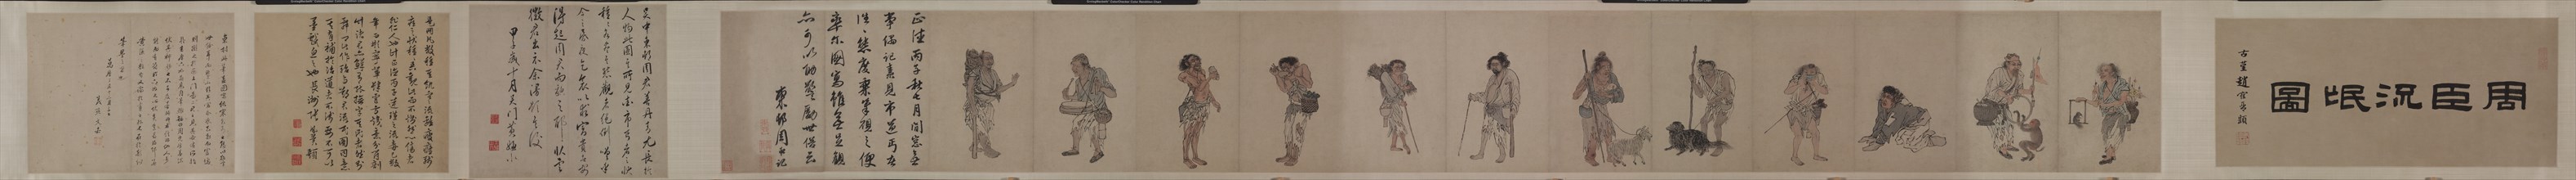 Beggars and Street Characters, 1516. Creator: Zhou Chen (Chinese, c. 1450-c. 1536).